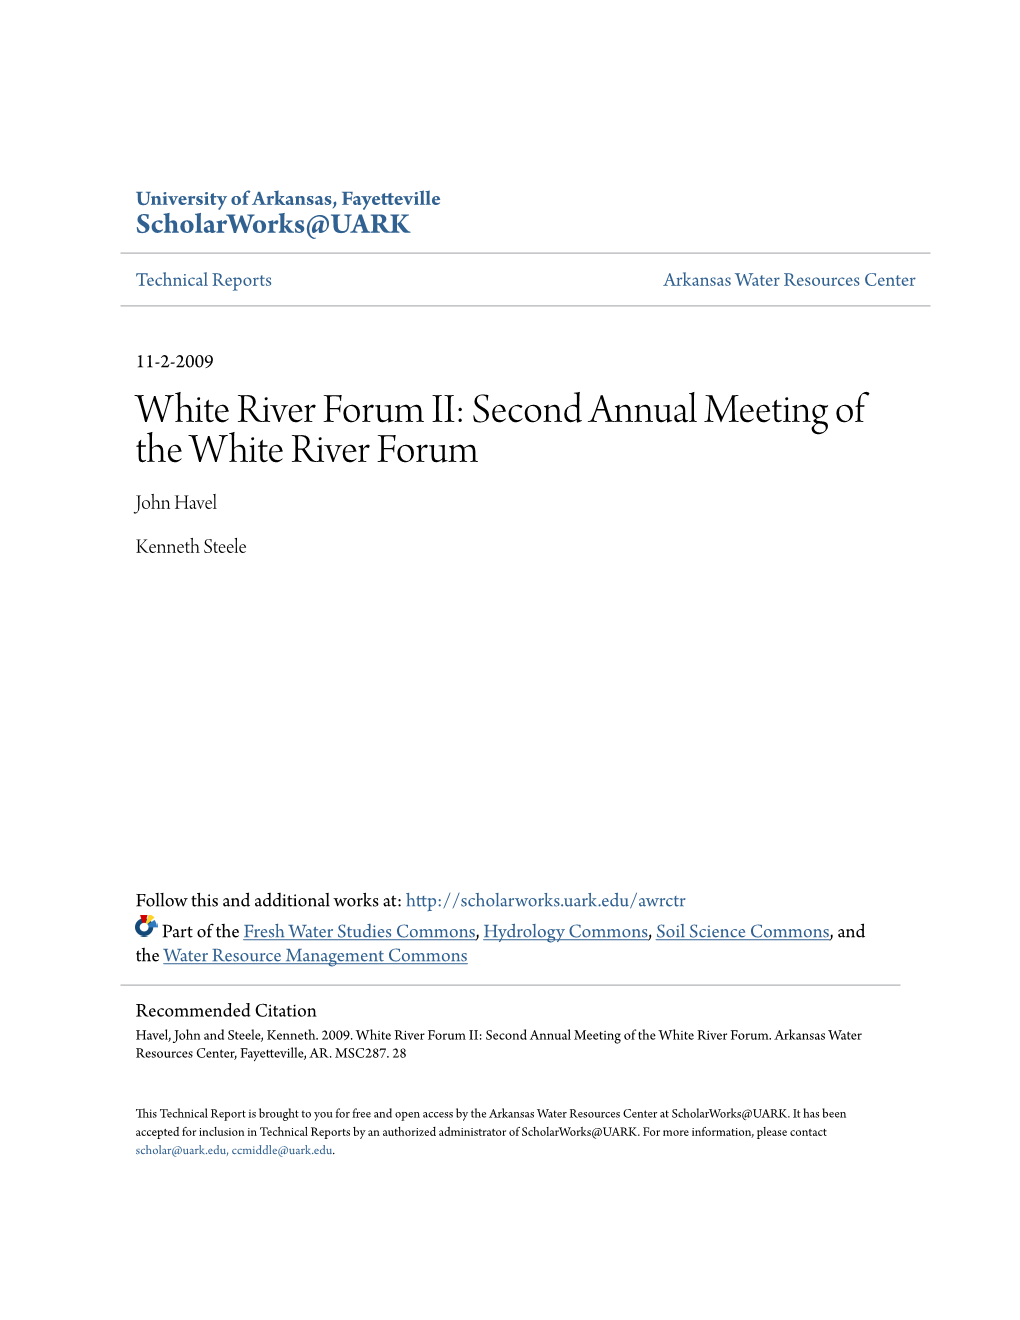 White River Forum II: Second Annual Meeting of the White River Forum John Havel